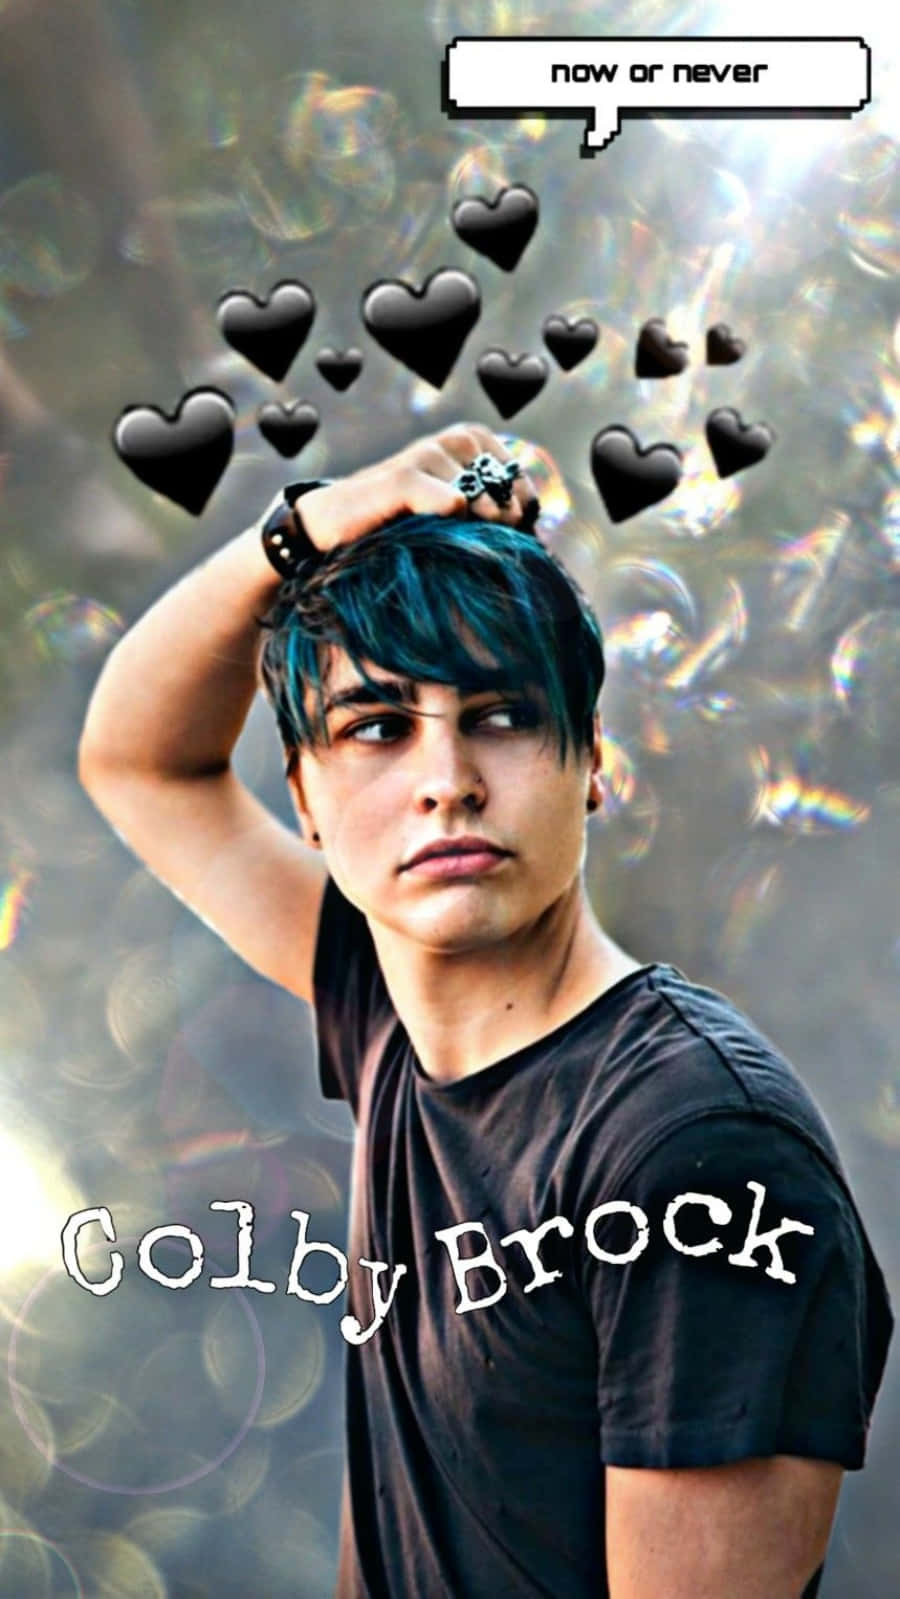 A candid picture of Colby Brock smiling. Wallpaper